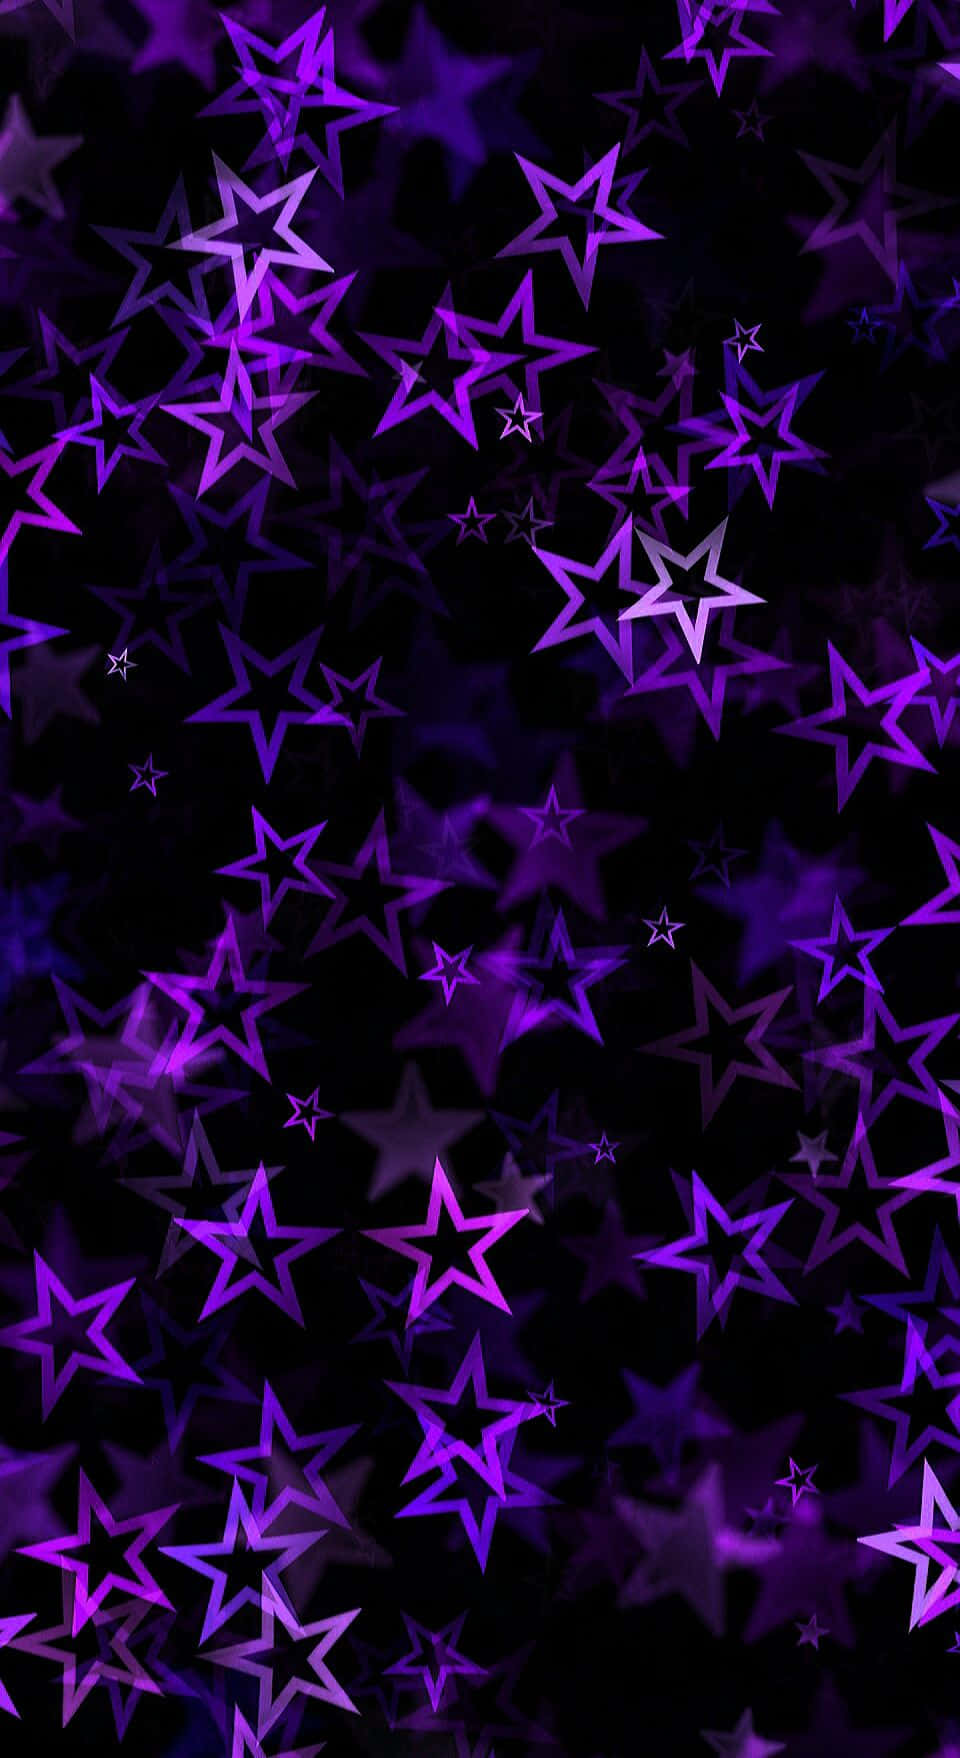 Magical lavender star glistening and shining in the night sky Wallpaper